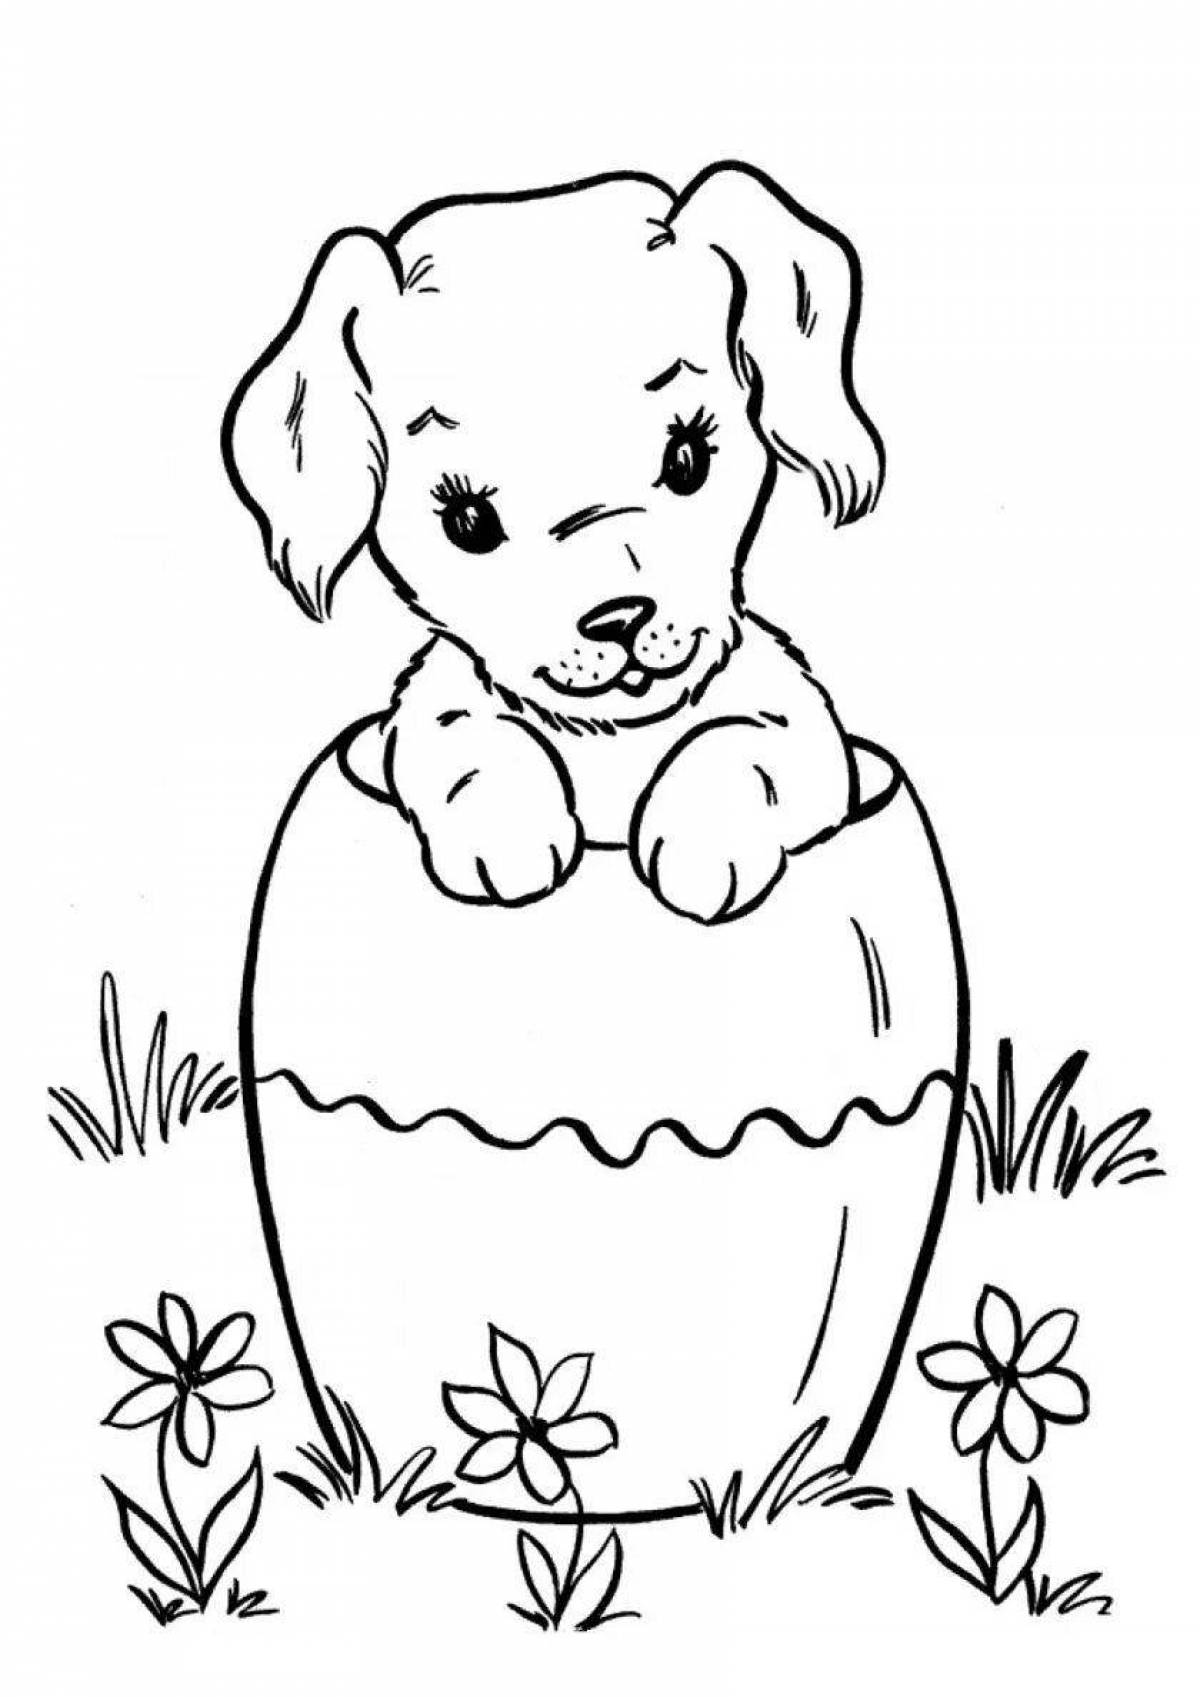 Waggish dog coloring book for children 7-8 years old